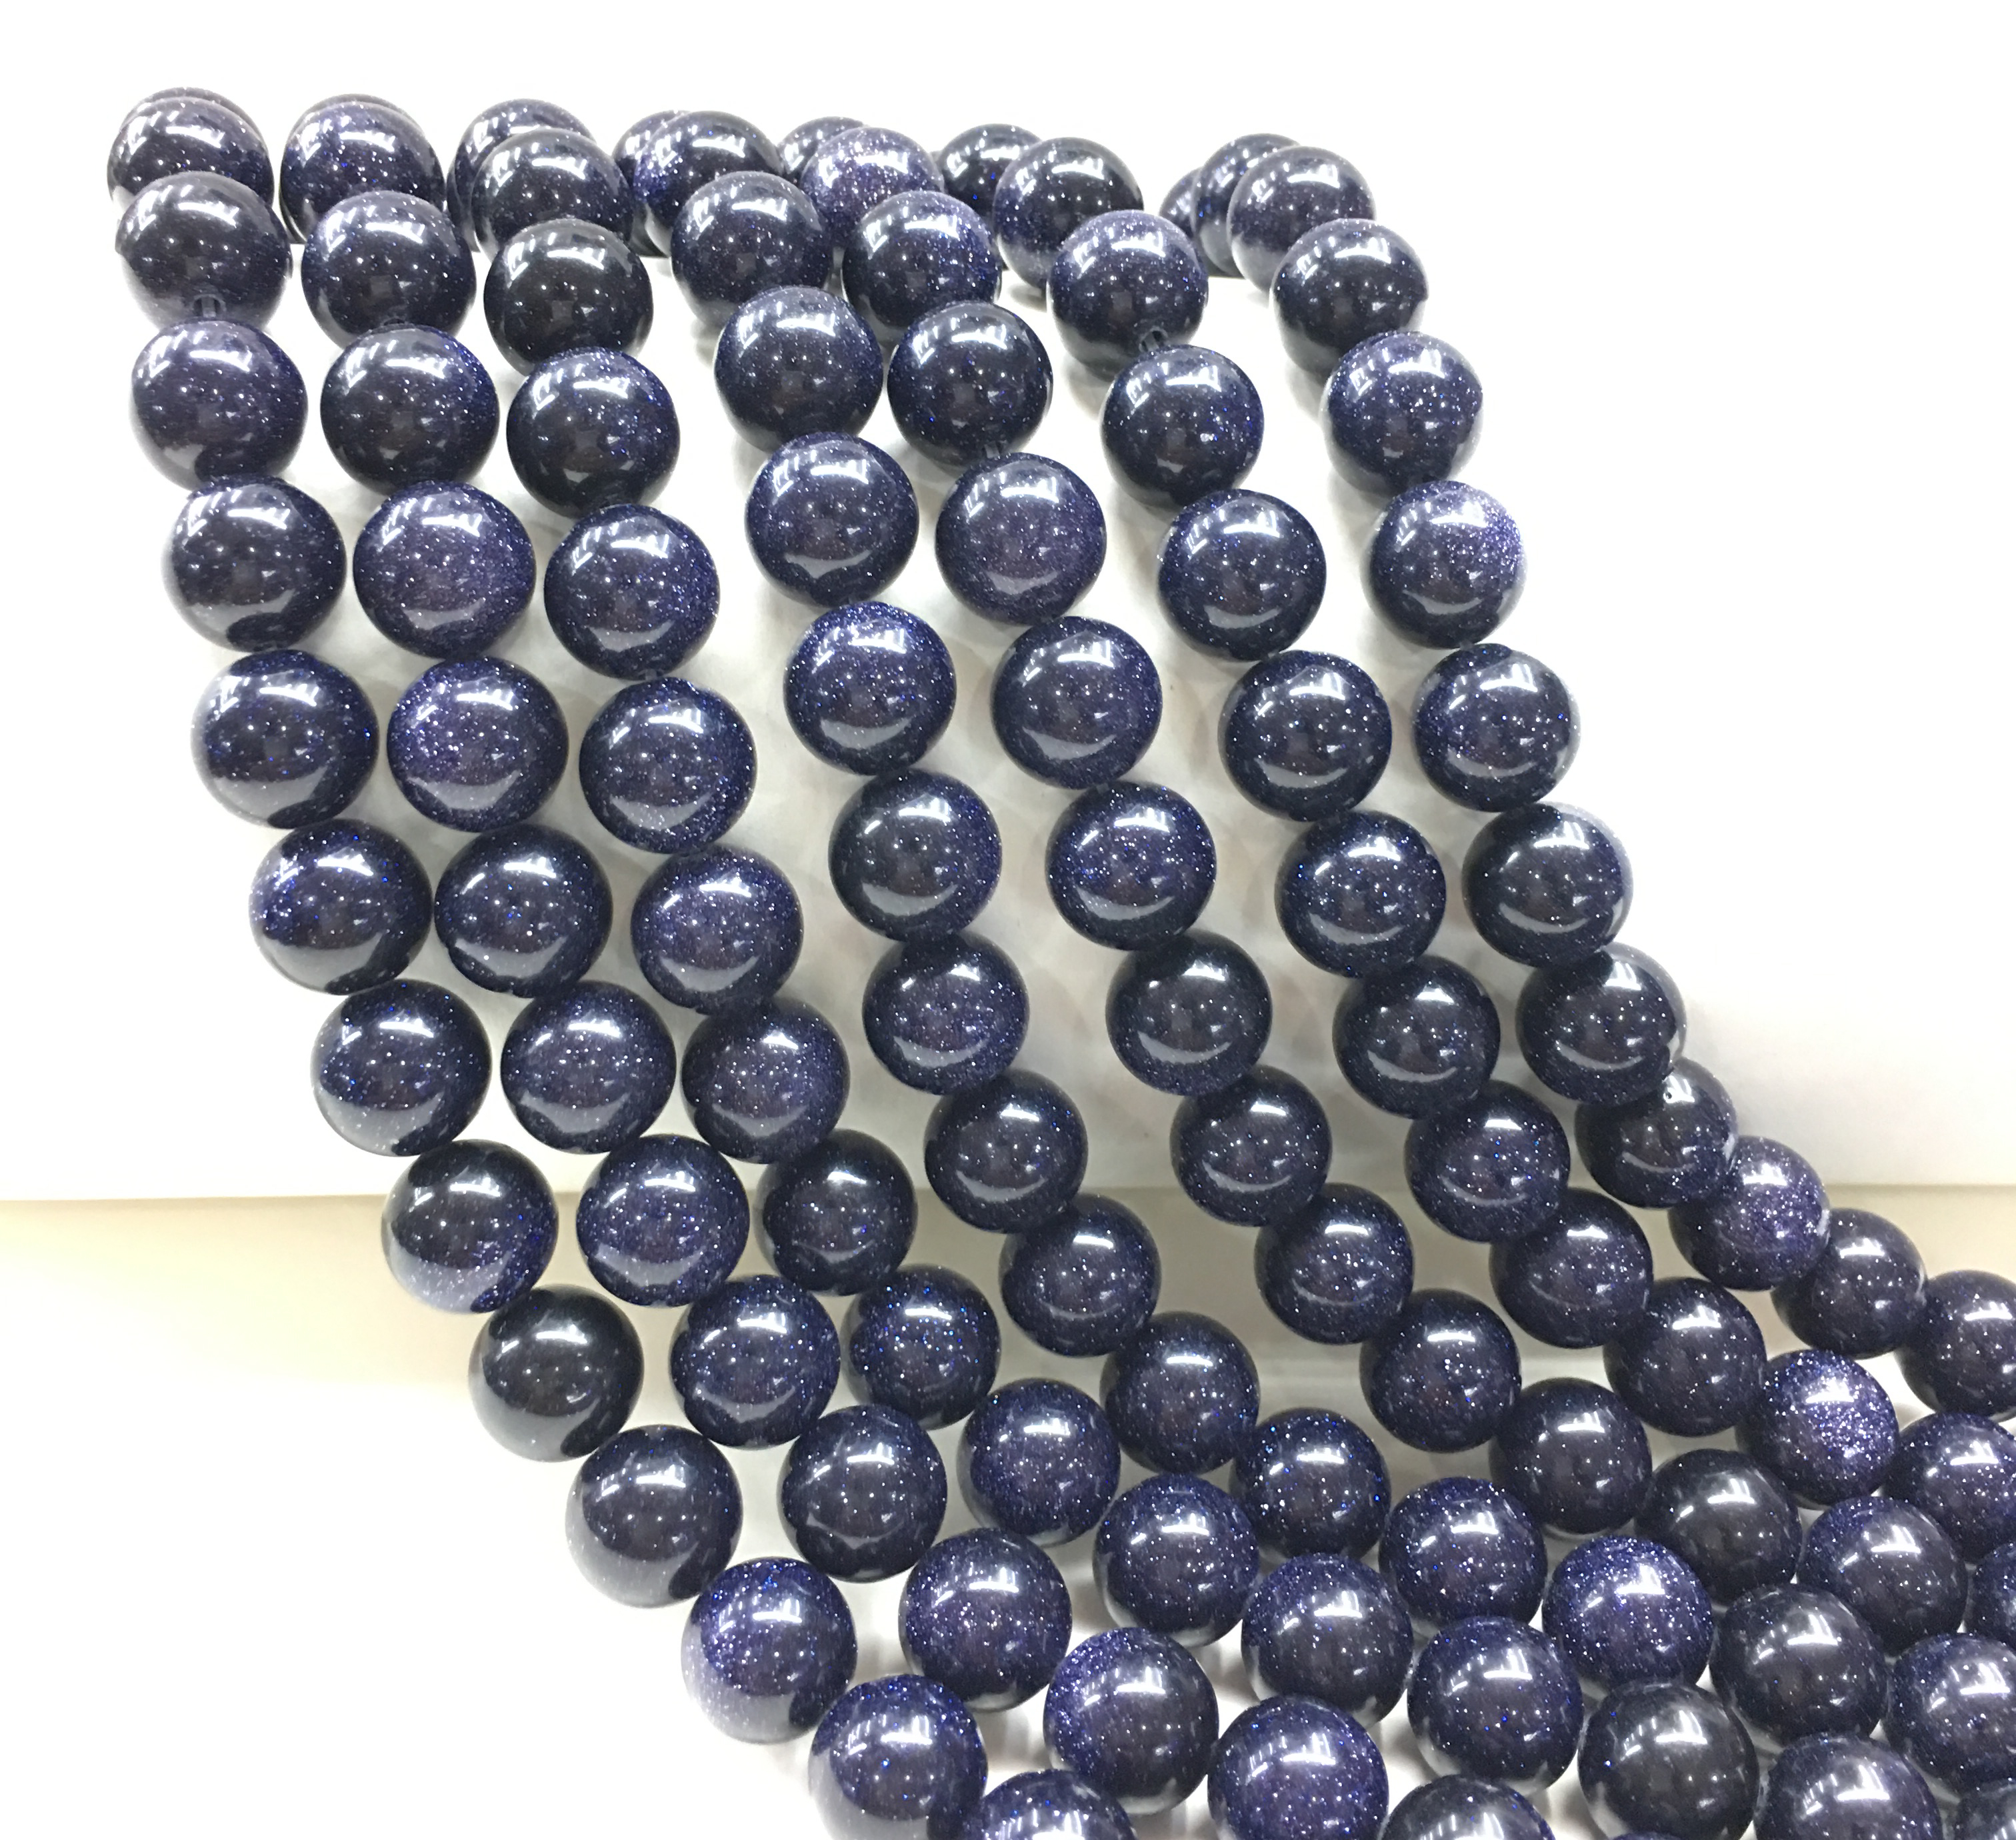 Blue Goldstone or Sand Stone Round Loose Bead Healing Energy Stone for DIY Jewelry &  Bracelet Necklace Design 4mm 6mm 8mm 10mm